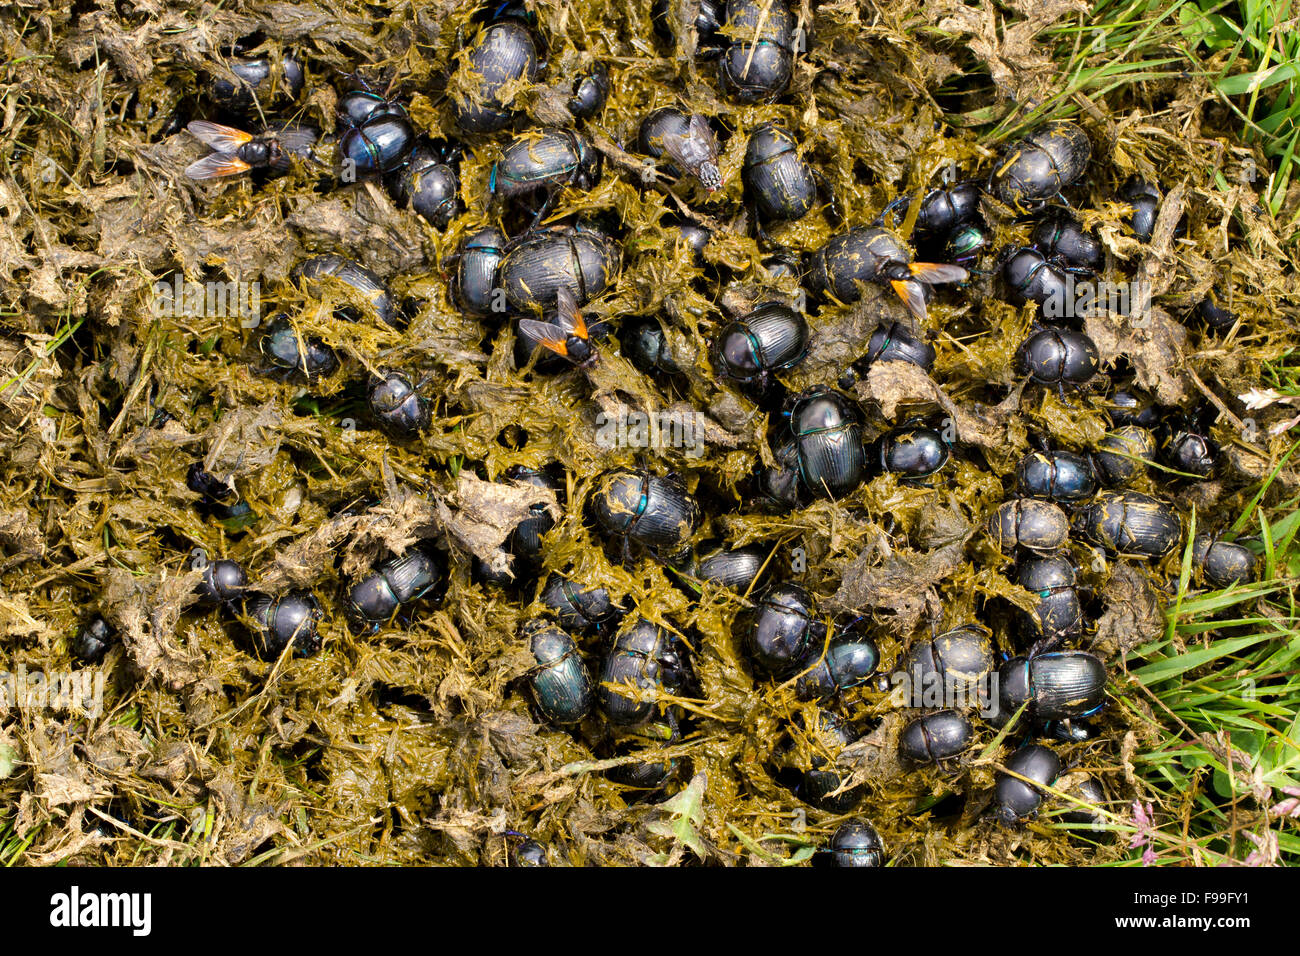 Dung Beetles (several Geotrupes species) adults swarming in fresh cow dung from the first cattle onto an alpine pasture. Stock Photo